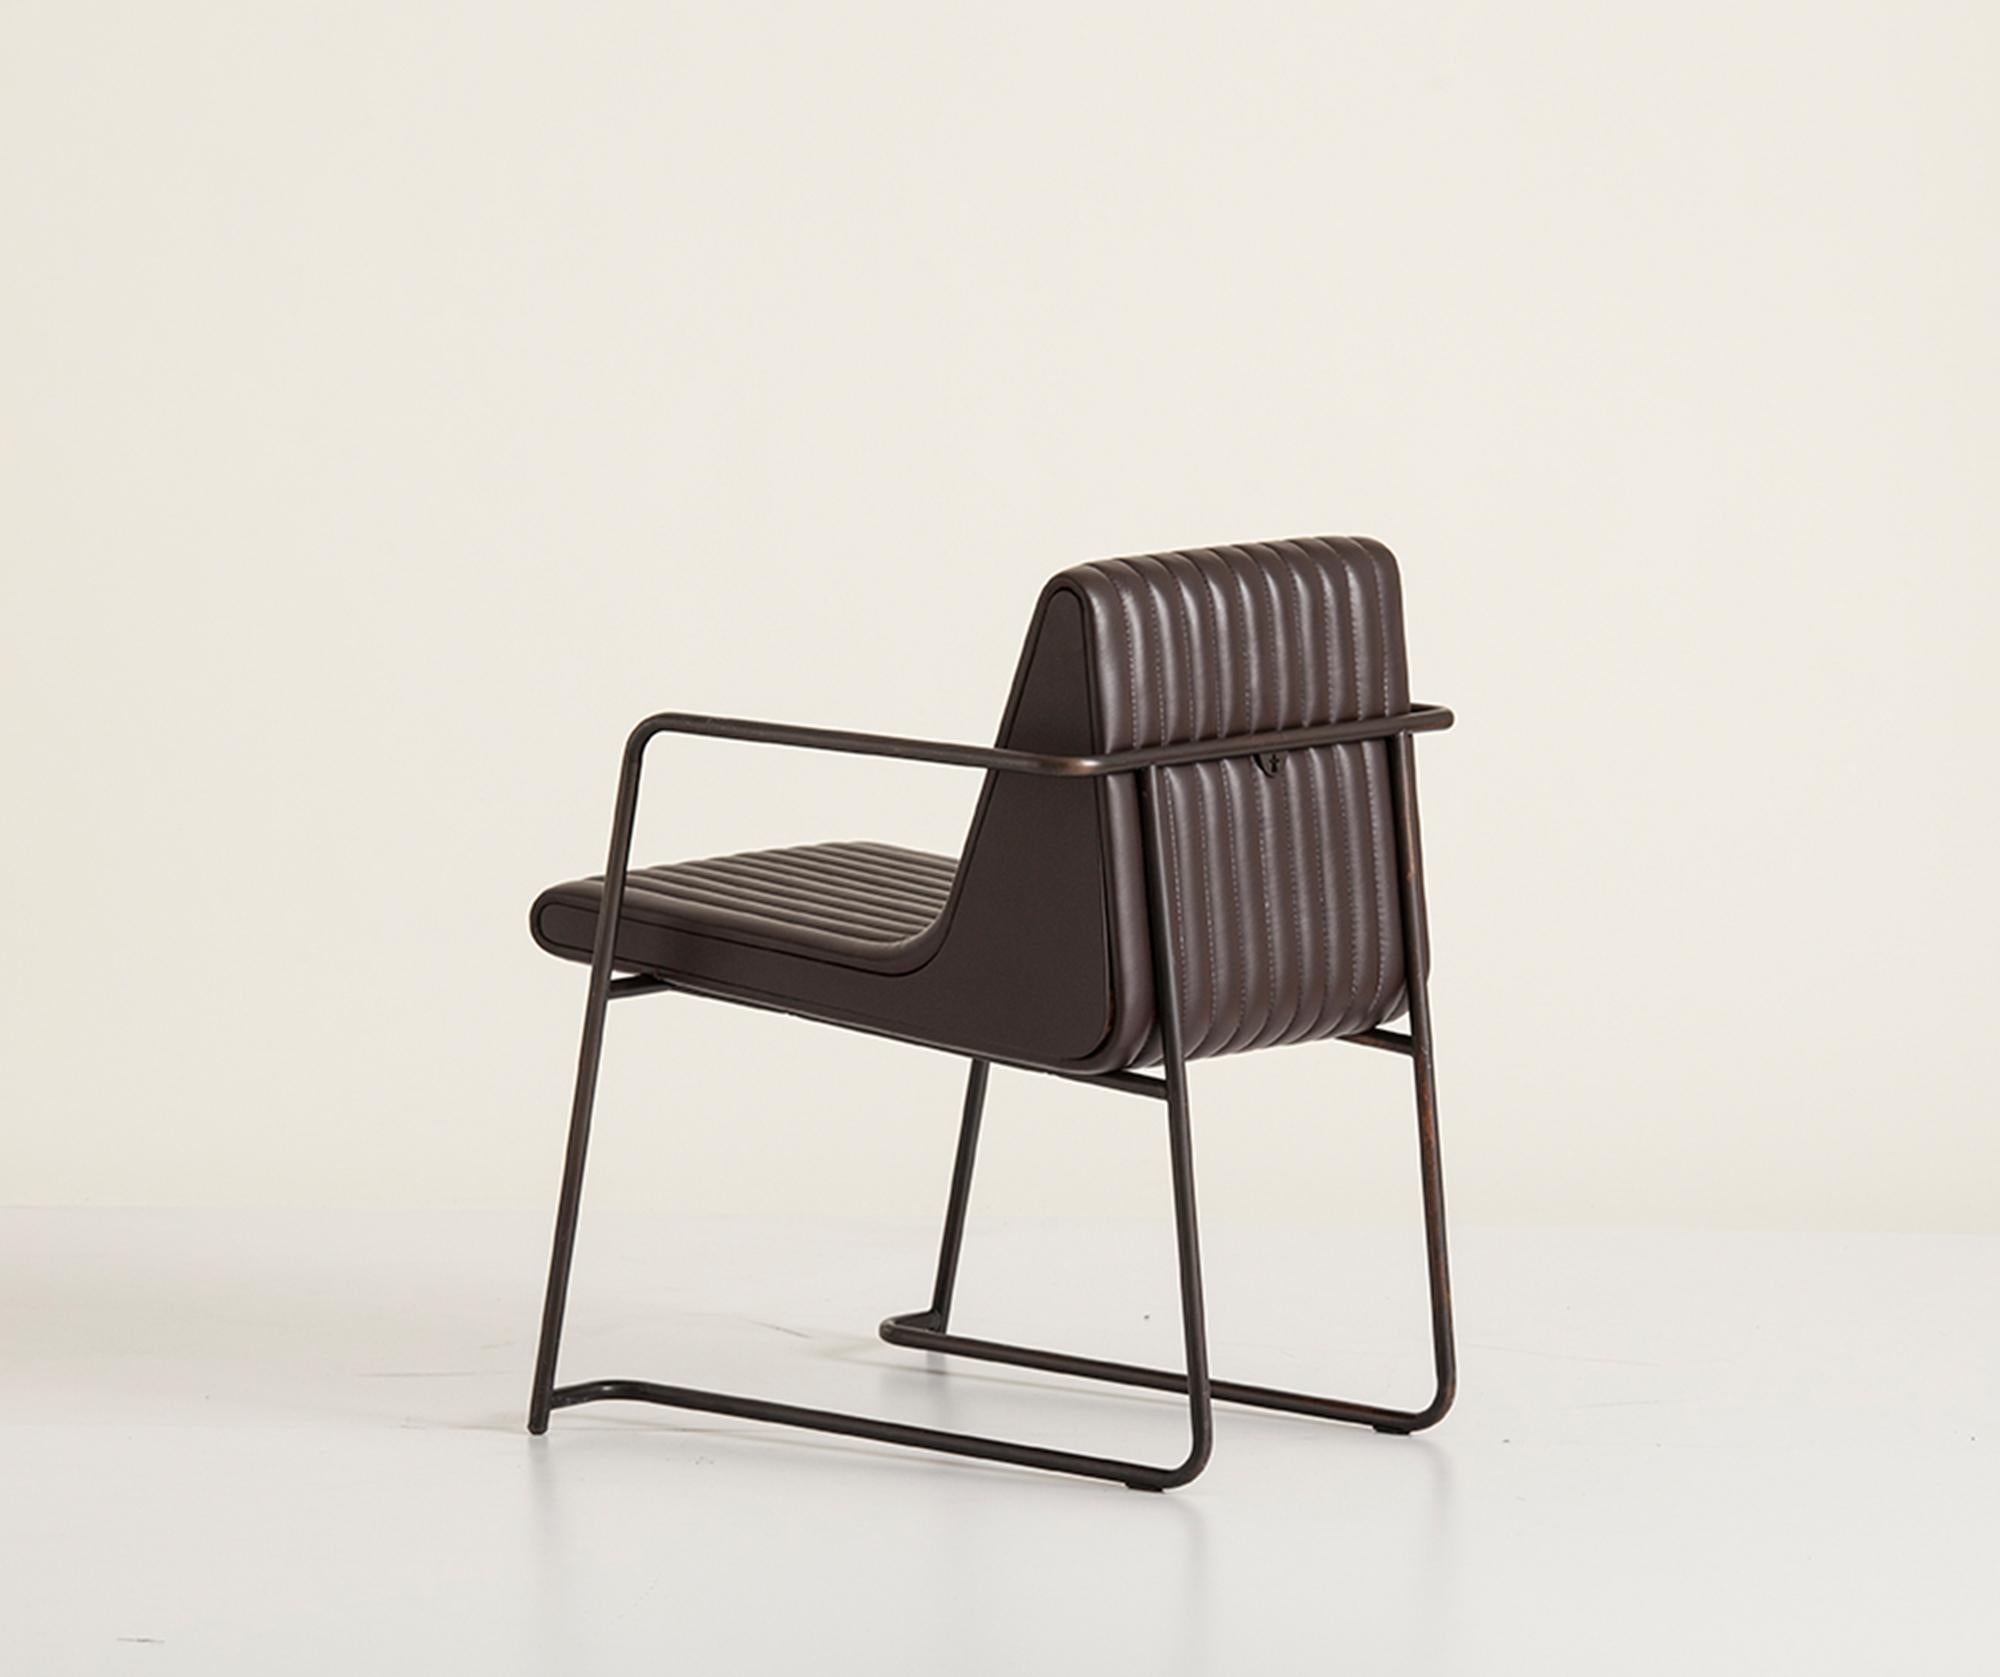 Originally designed for Nopa Restaurant, Nopa series combines comfort with a modern approach. Nopa Chair has a bold presence with its characteristic form and upholstery. The leather upholstered seat is nested in a tubular metal frame creating a